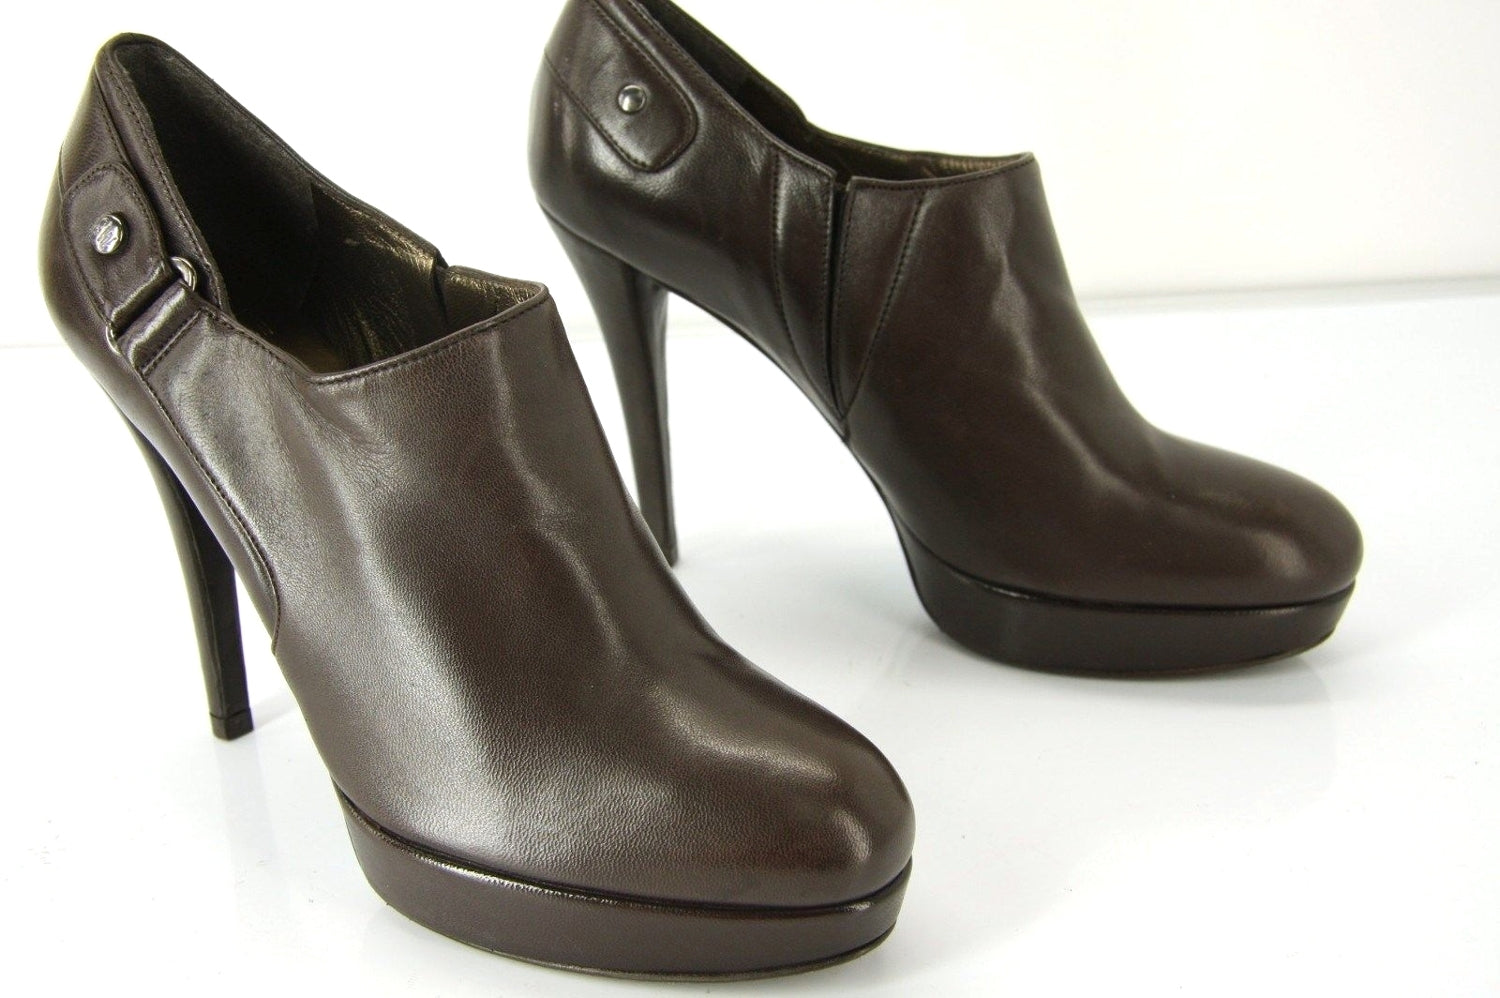 Stuart Weitzman The Coverall Platform Almond Toe Ankle Boots Size 7N Narrow $470